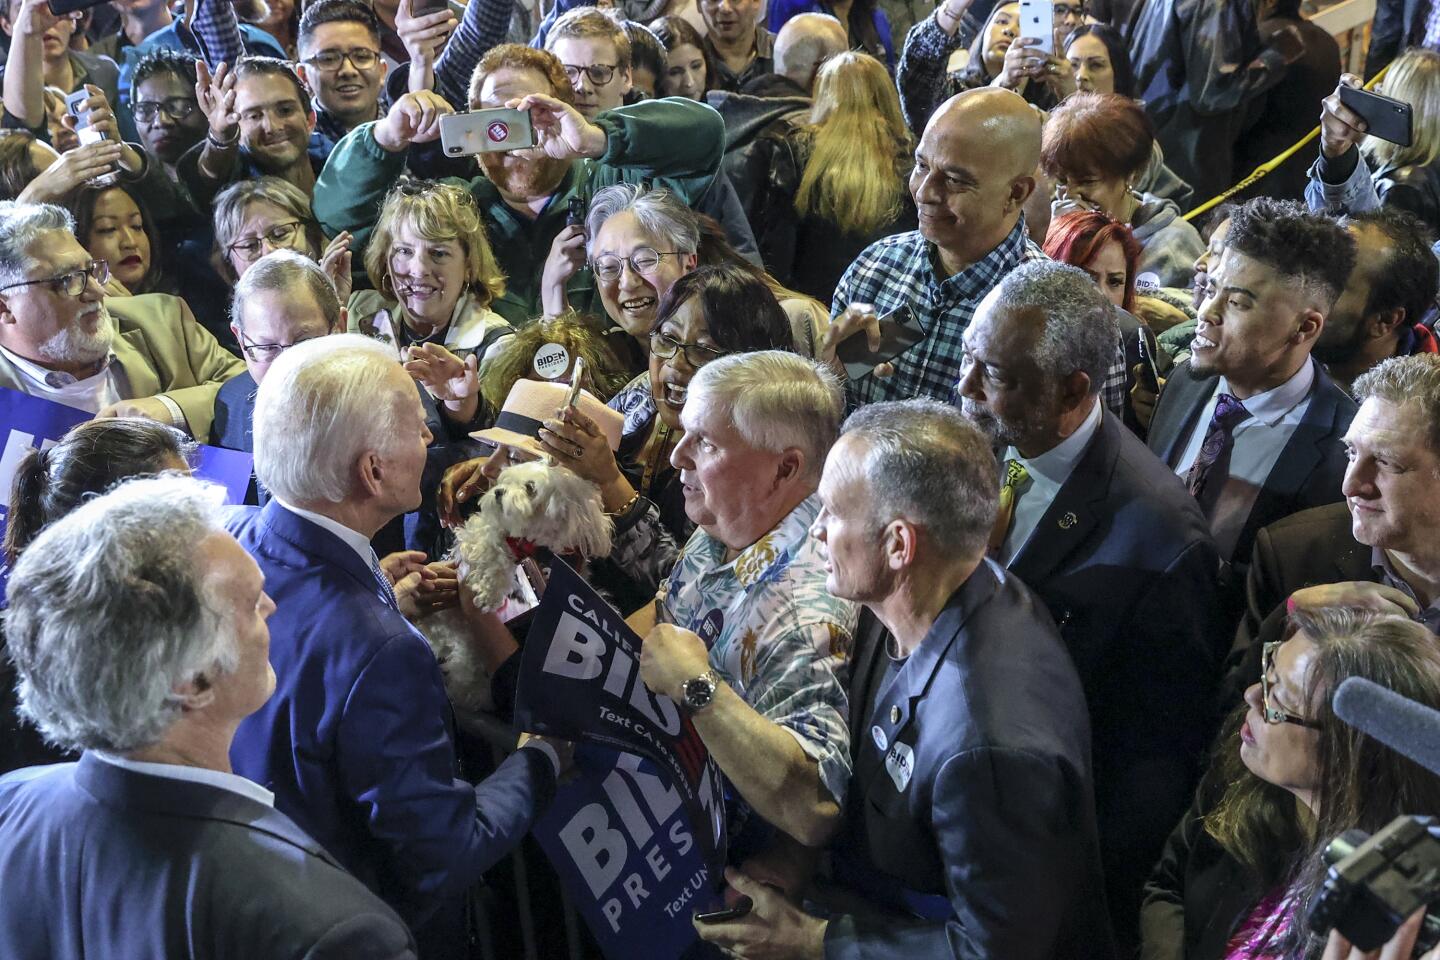 Joe Biden speaks with supporters after his L.A. rally Tuesday night.